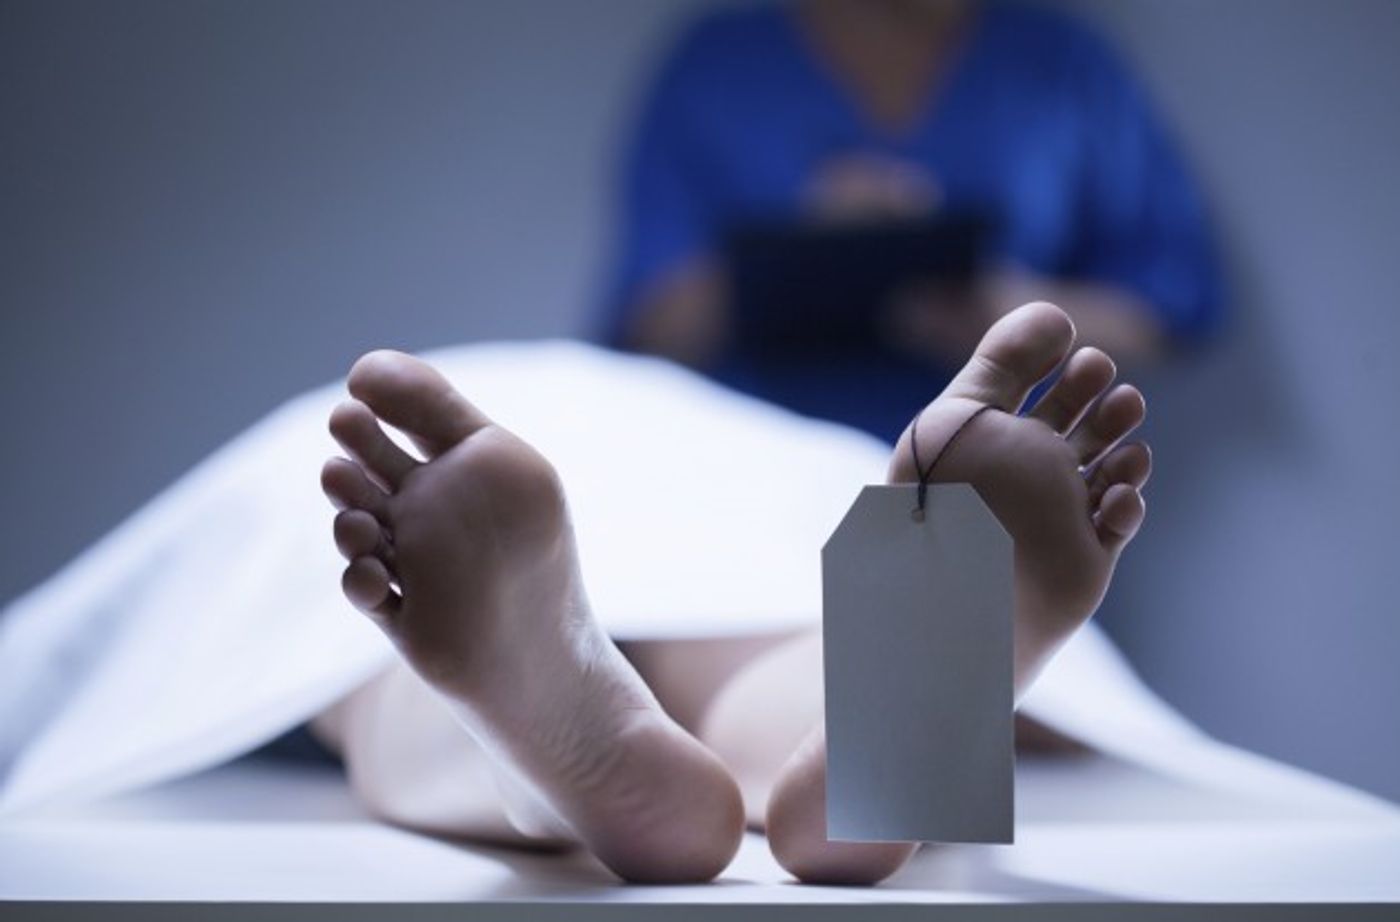 The postmortem microbiome could reveal time of death.